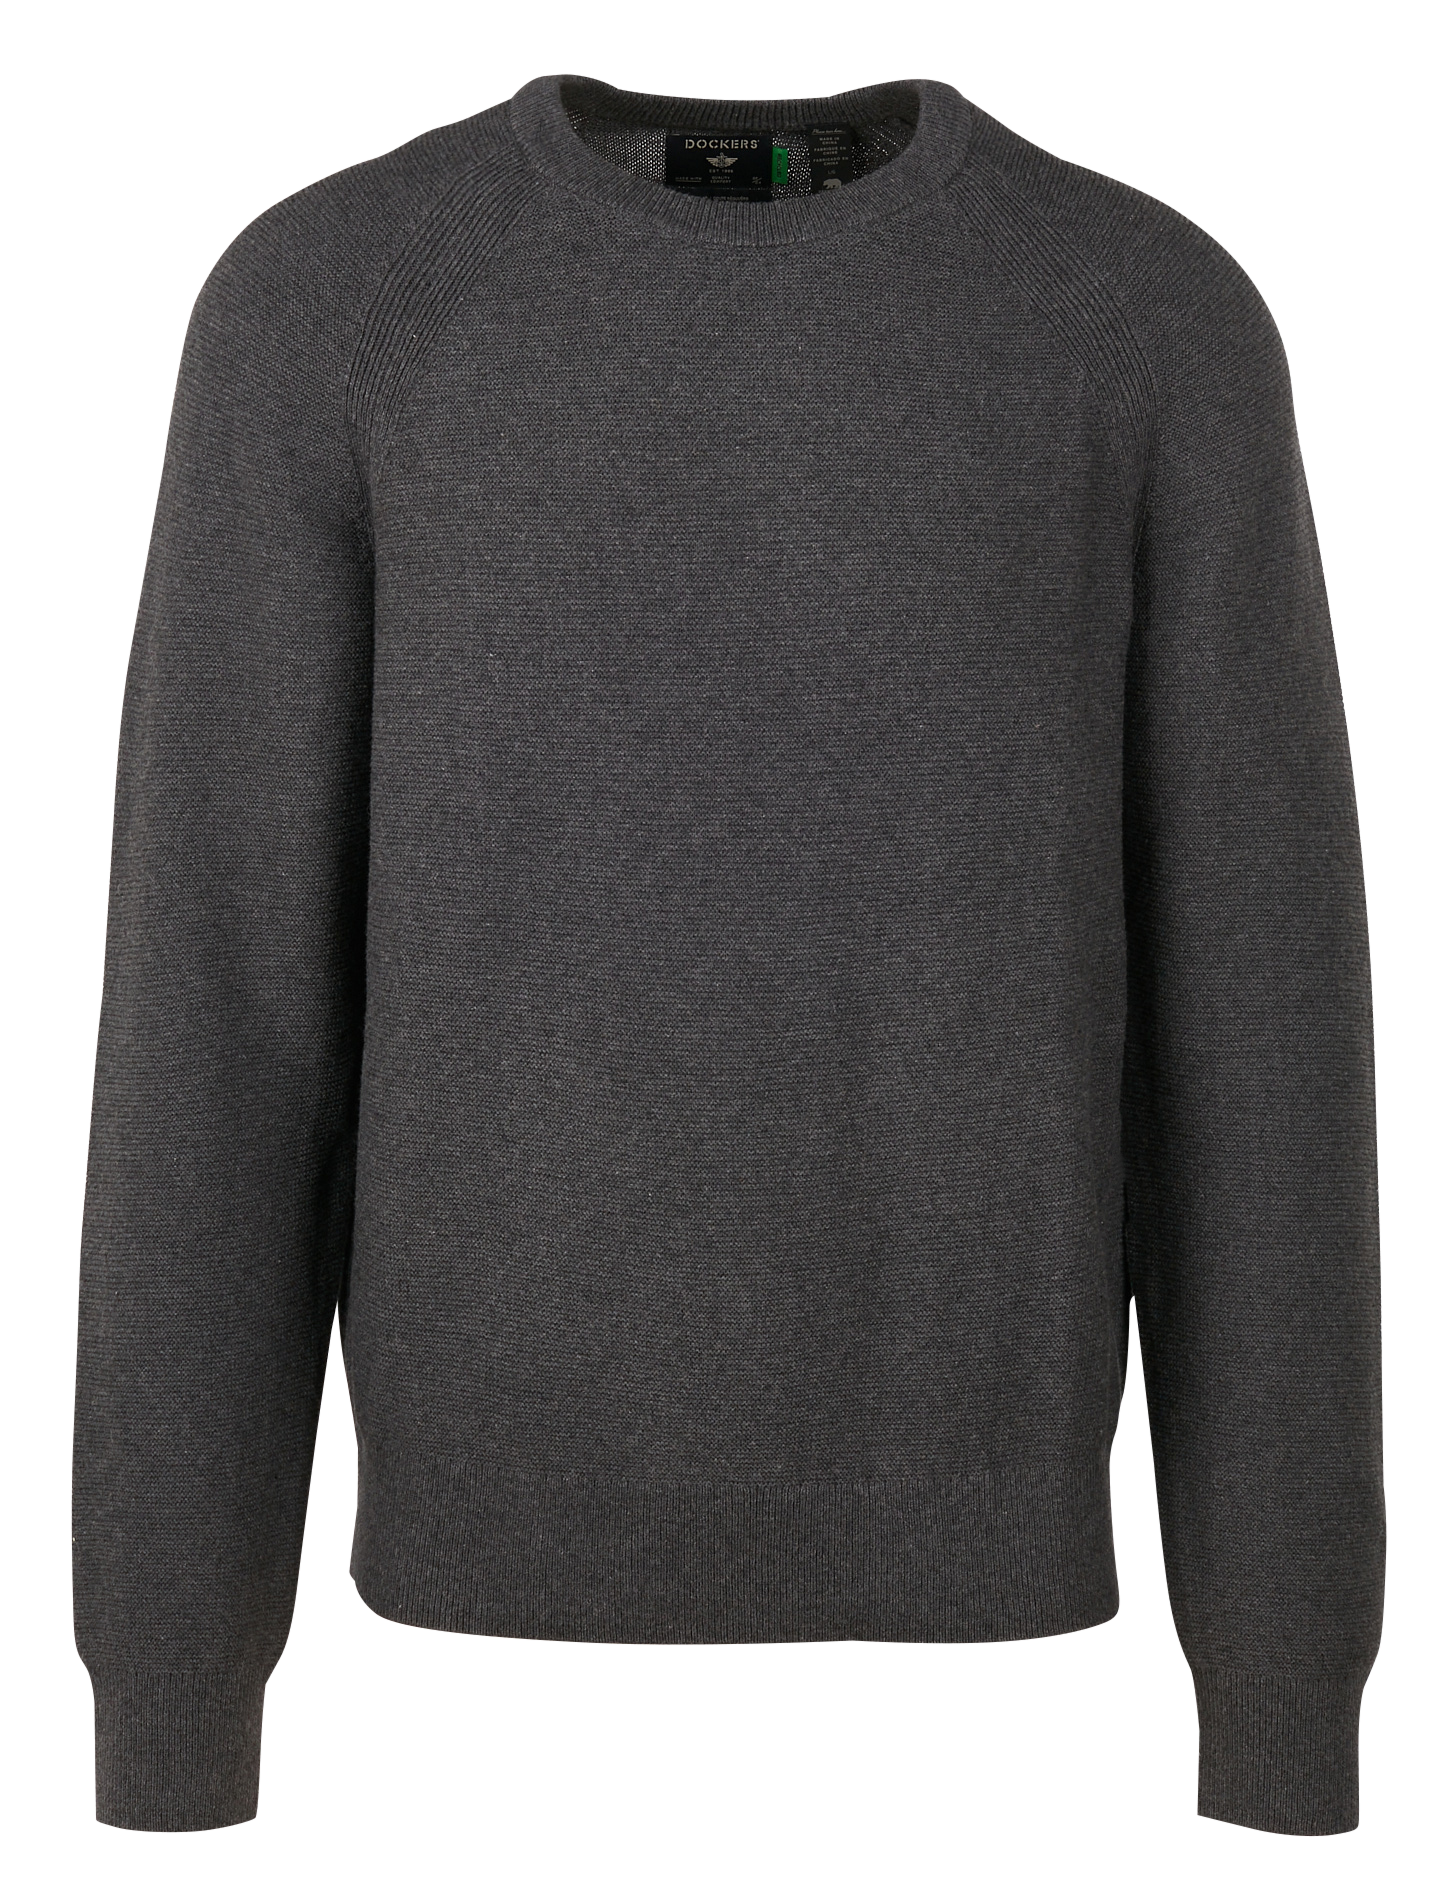 Neuf DOCKERS Homme Comfort Touch à manches longues Asphalte sweater Taille S 